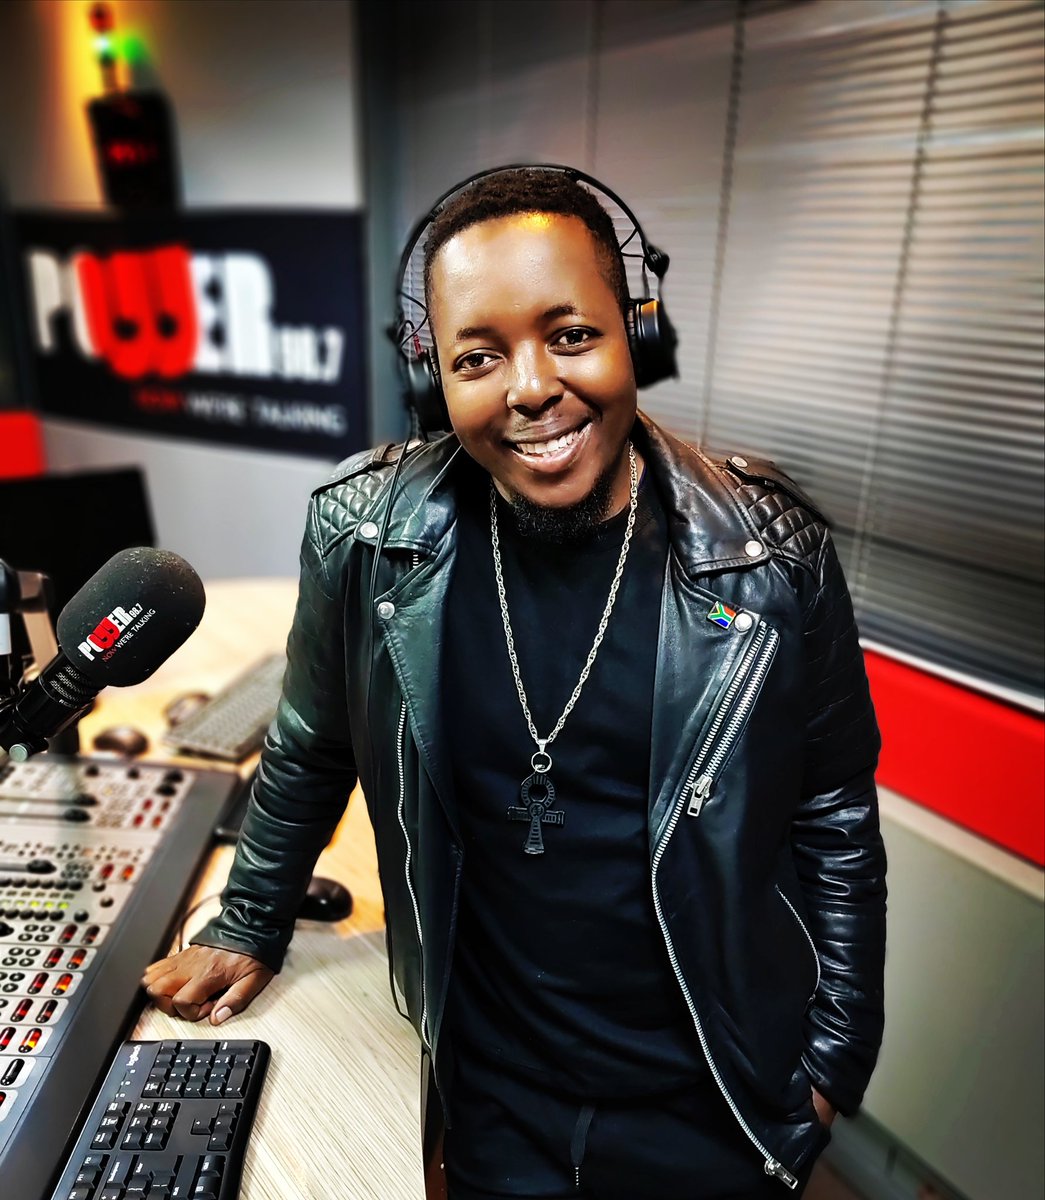 🙏🏽for tuning-in this weekend #YouthDay #FathersDay & #MensHealthMonth
My🎂Day Si-ON 21st & I'm Blessed to come this far🥹I also celebrate YOU 'Super Groova', Wena 'Groovist' Yam for always Tuning-in @Powerfm987 as🍾 #POWERTurns10 🎉 I hope you stay with us😉
✌🏽&♥️
MAVERICK.